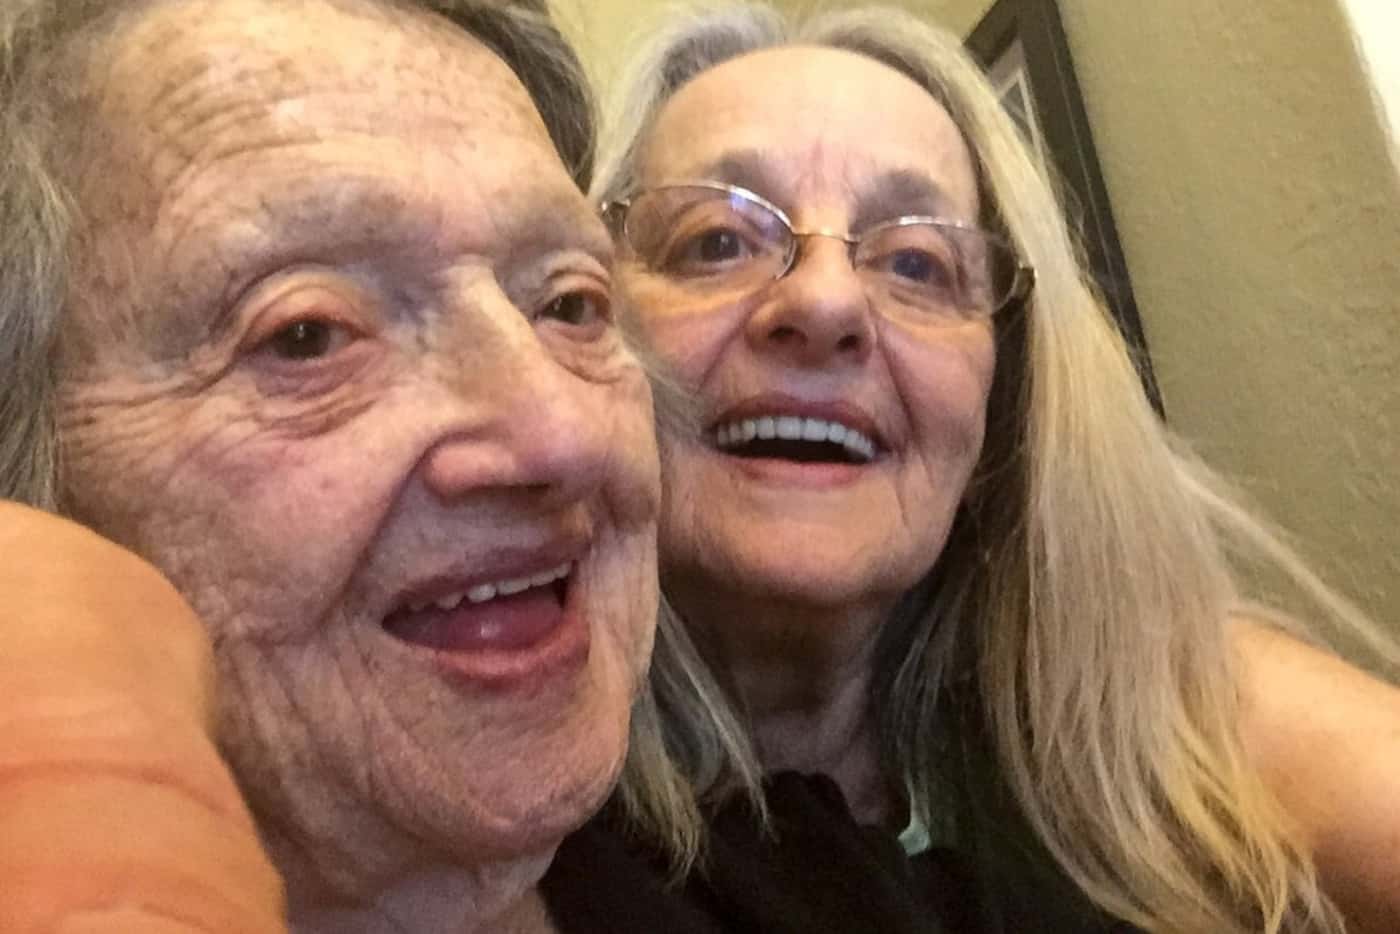 Connie Moultroupk takes a selfie with her mother, Genevieve Purinton, after reuniting thanks...